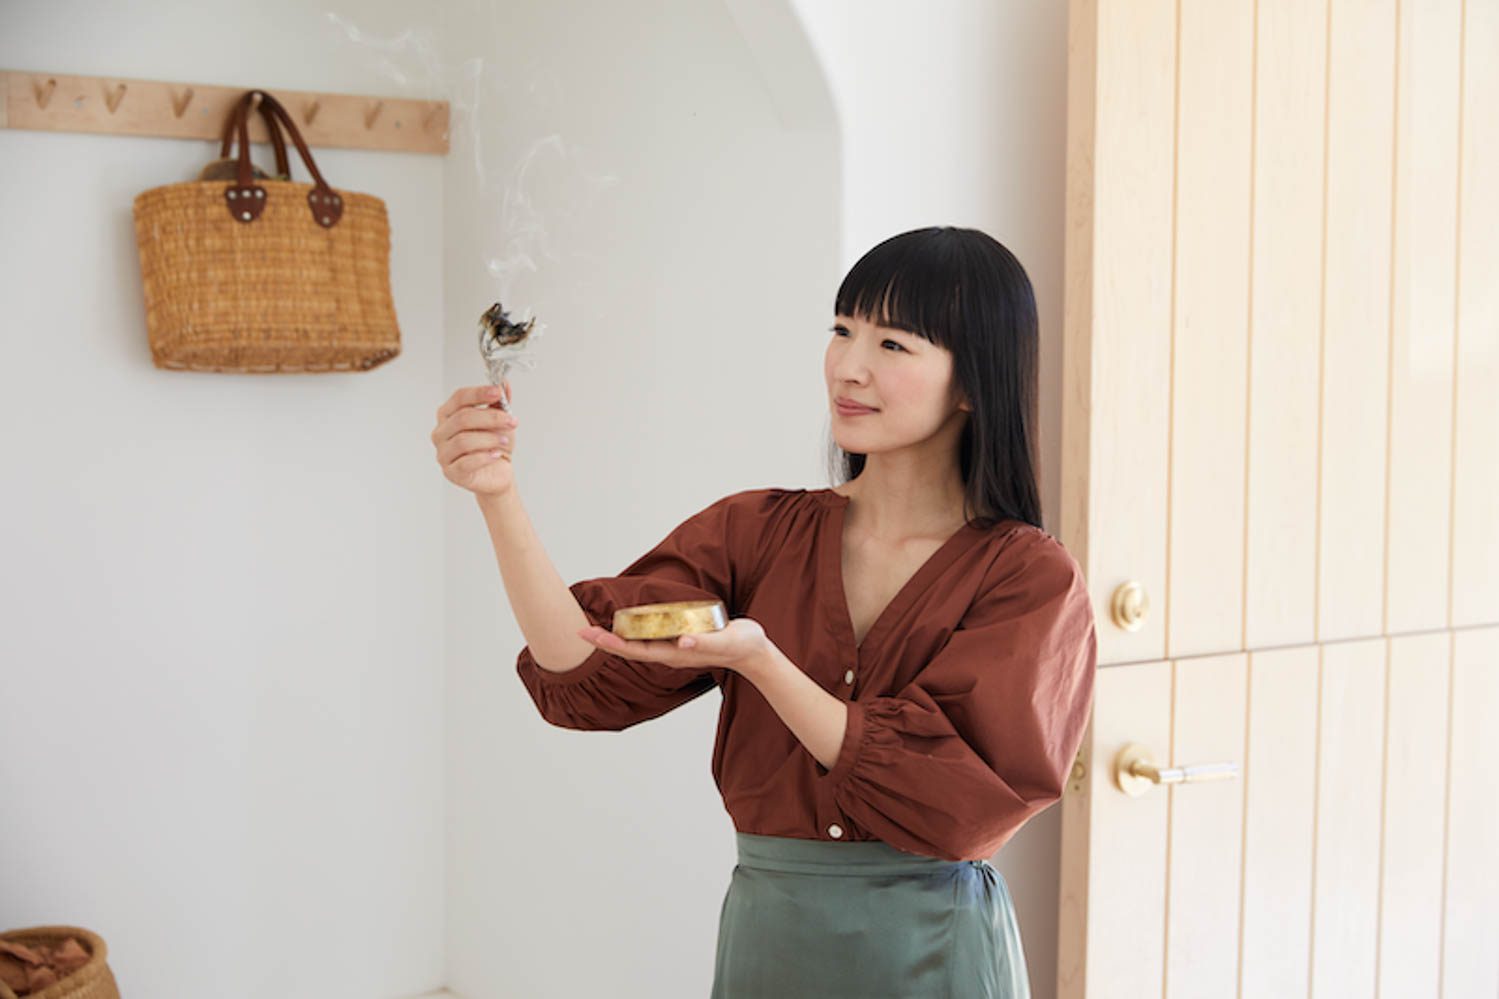 Since developing the KonMari Method at 19, Kondo has mentored others to become consultants, expanding her business in the process.